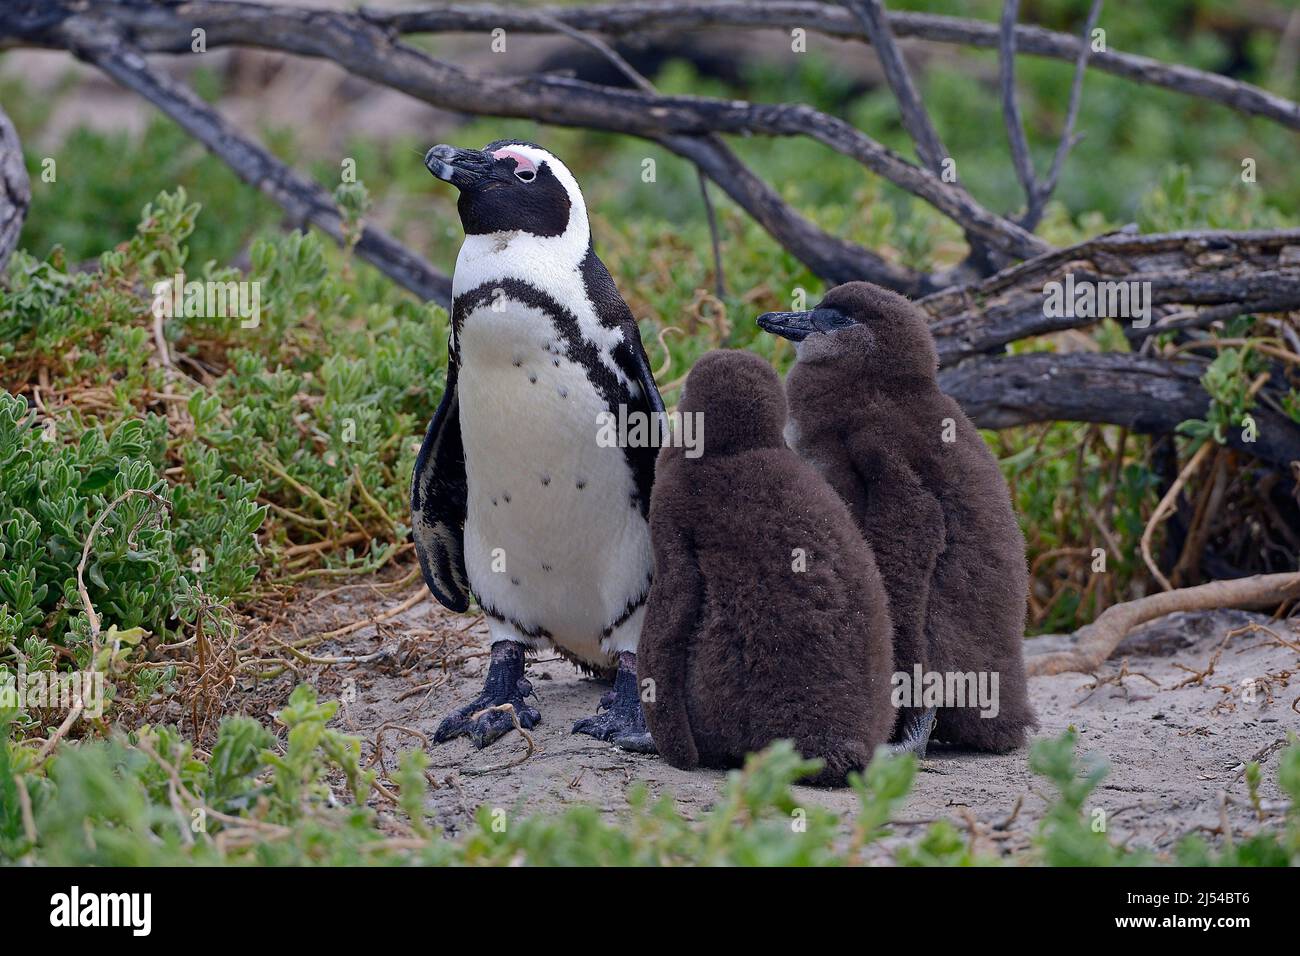 Jackass penguin, African penguin, Black-footed penguin (Spheniscus demersus), adult with juveniles, South Africa, Western Cape, Boulders Beach Stock Photo